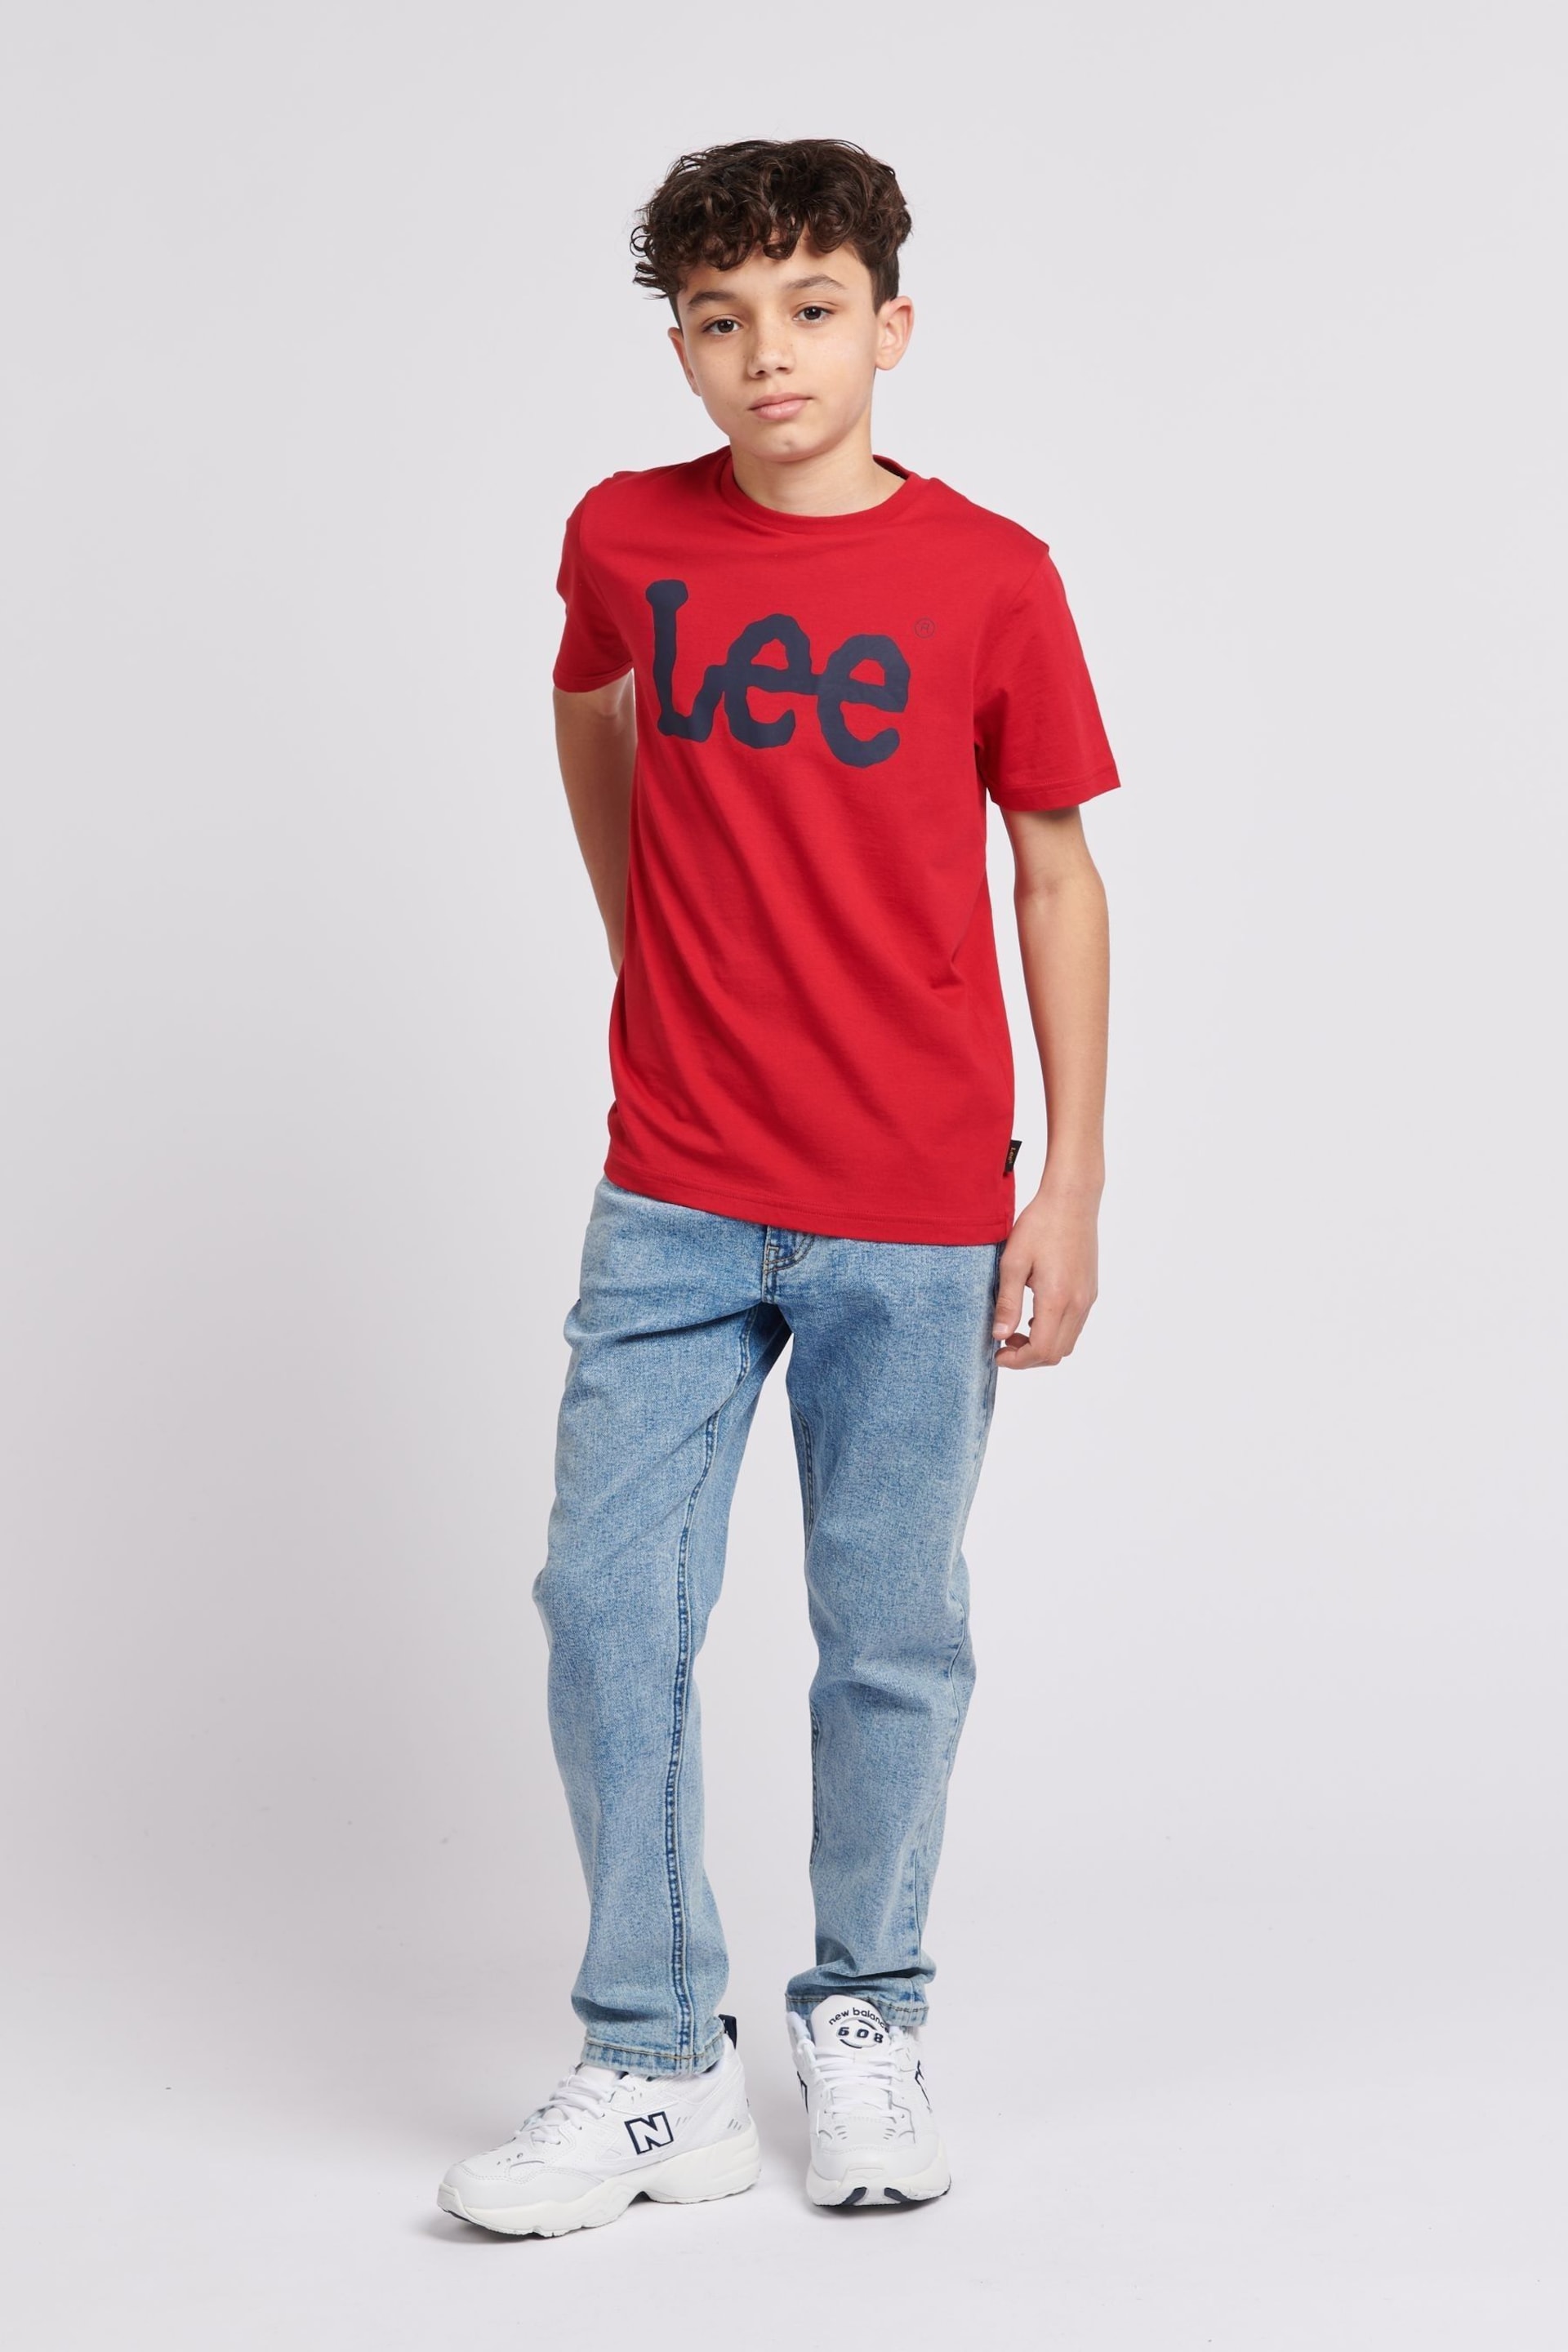 Lee Boys Wobbly Graphic T-Shirt - Image 5 of 5